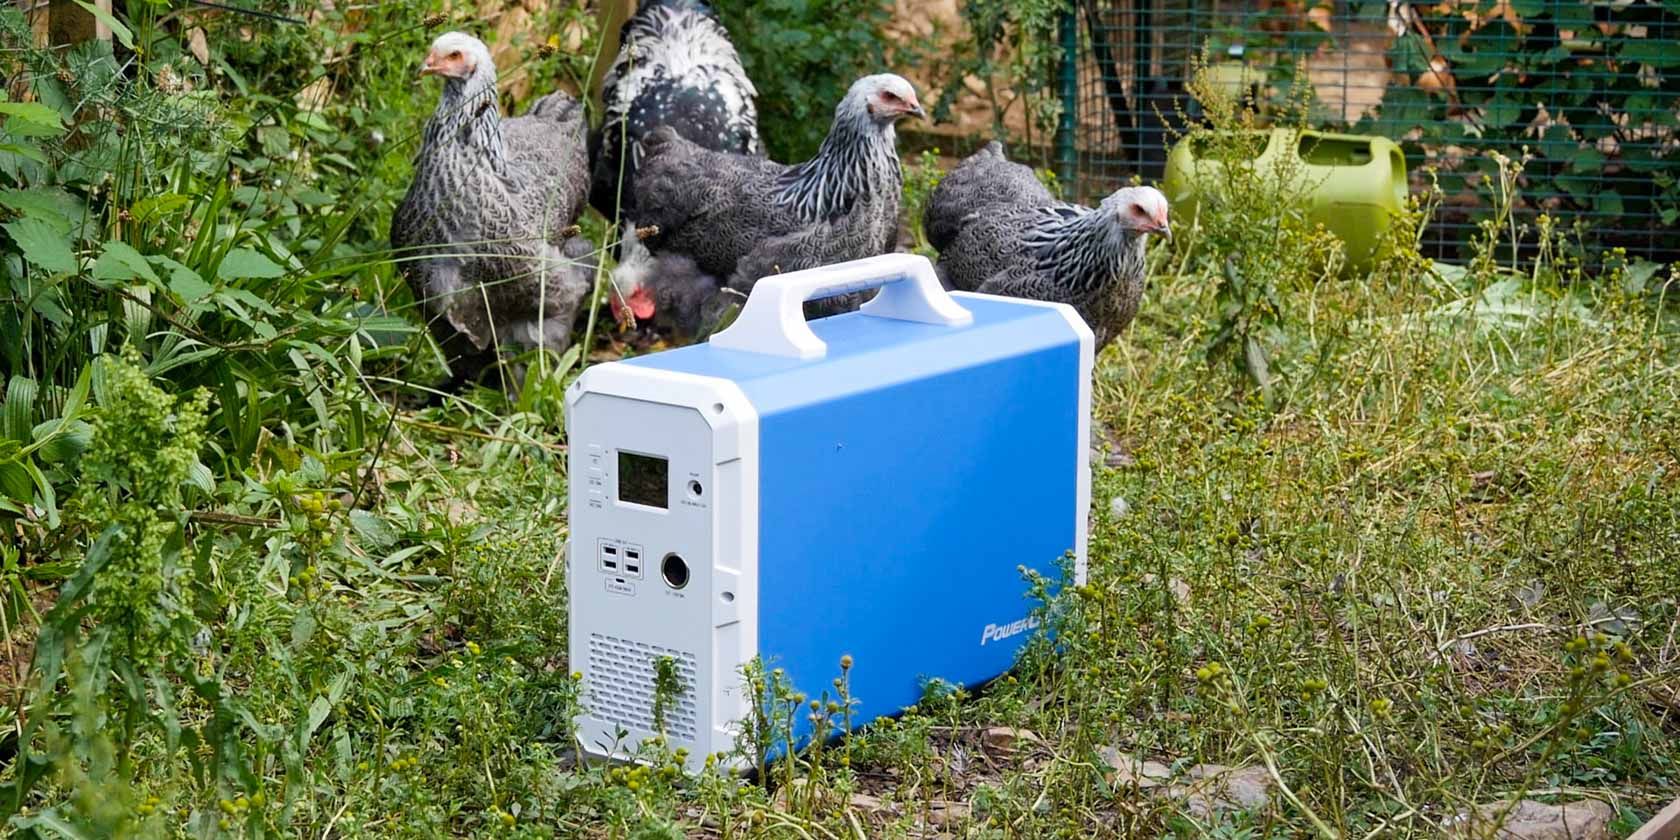 maxoak eb240 featured outside with the chickens